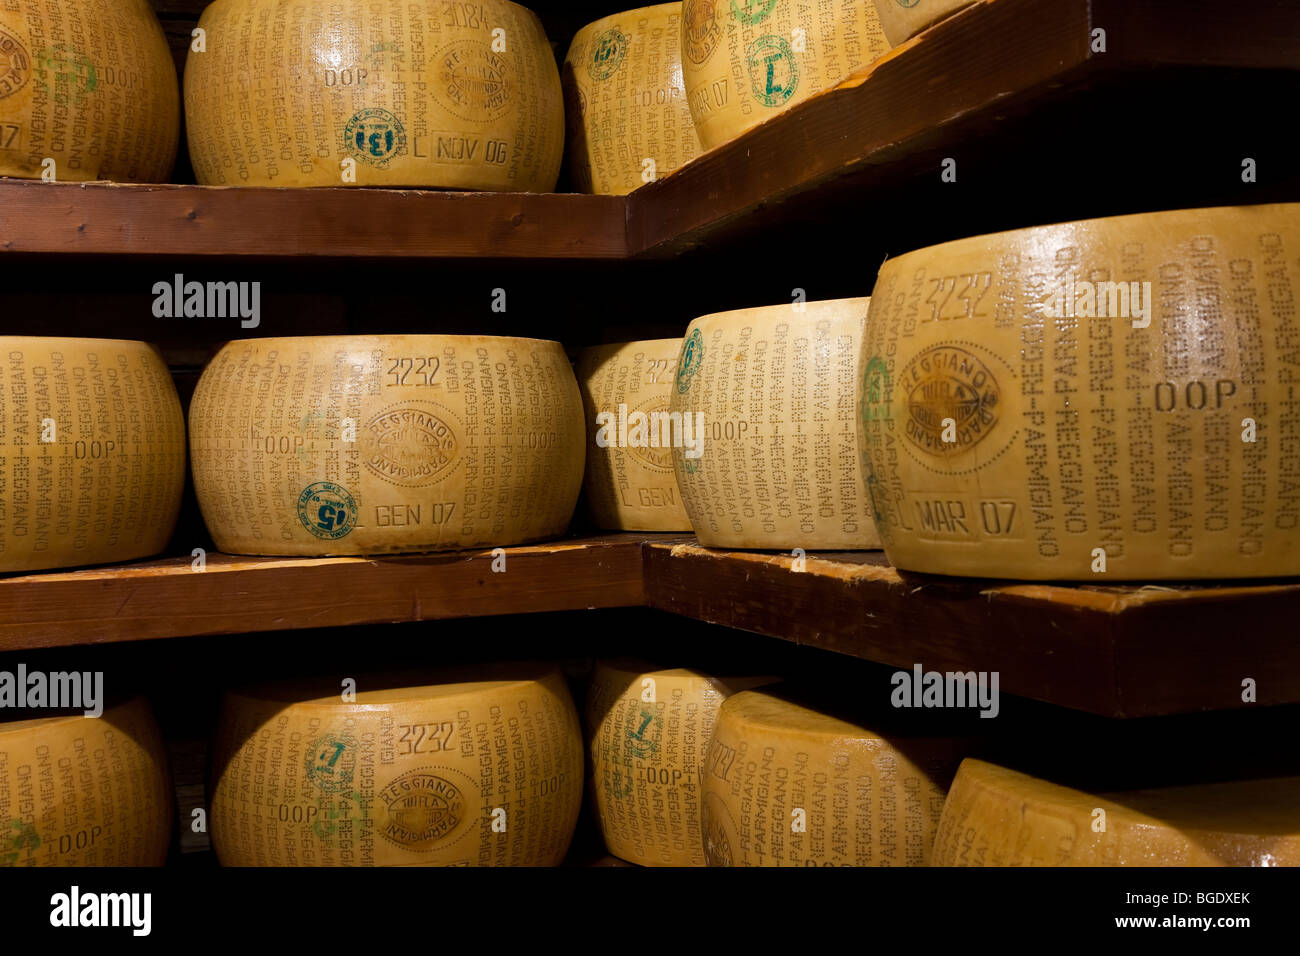 A selection of parmesan cheese in a deli in Parma, Emilia Romagna, Italy Stock Photo